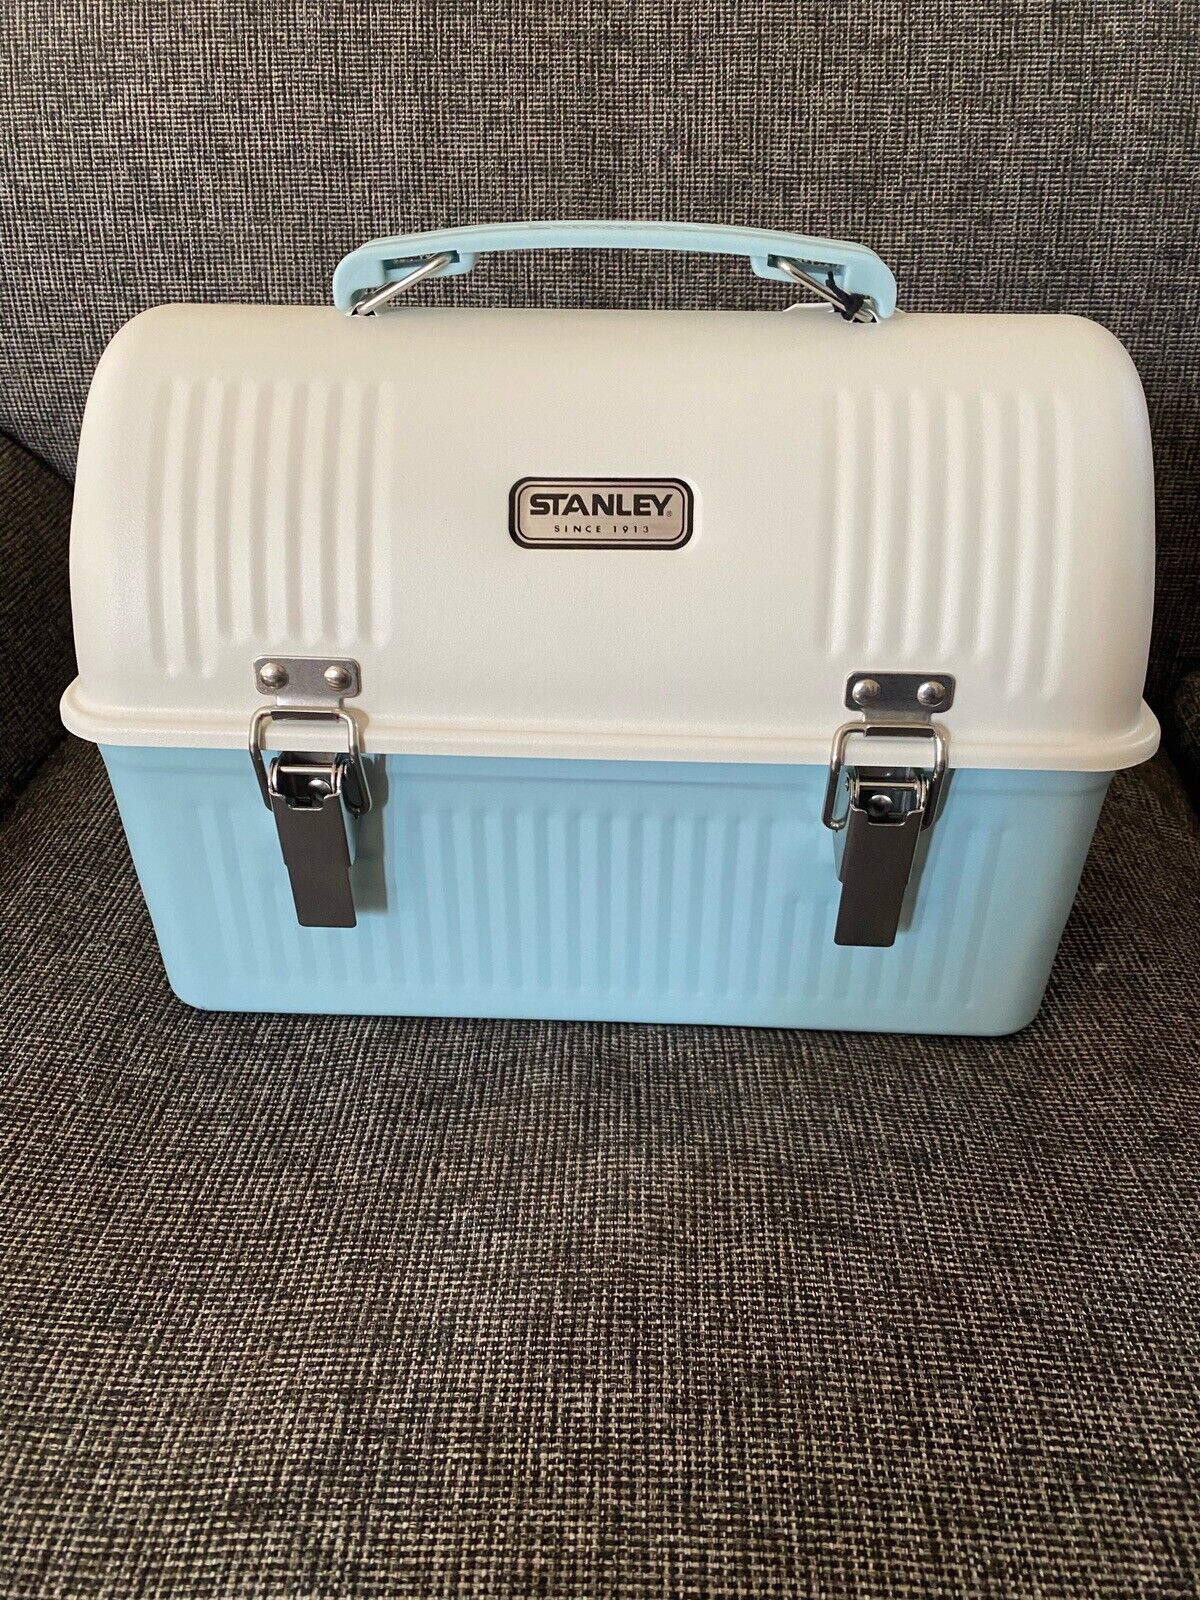 SALE RARE Stanley Steel Lunch Box Soft Blue, Hearth And Hand 10 QTS Magnolia